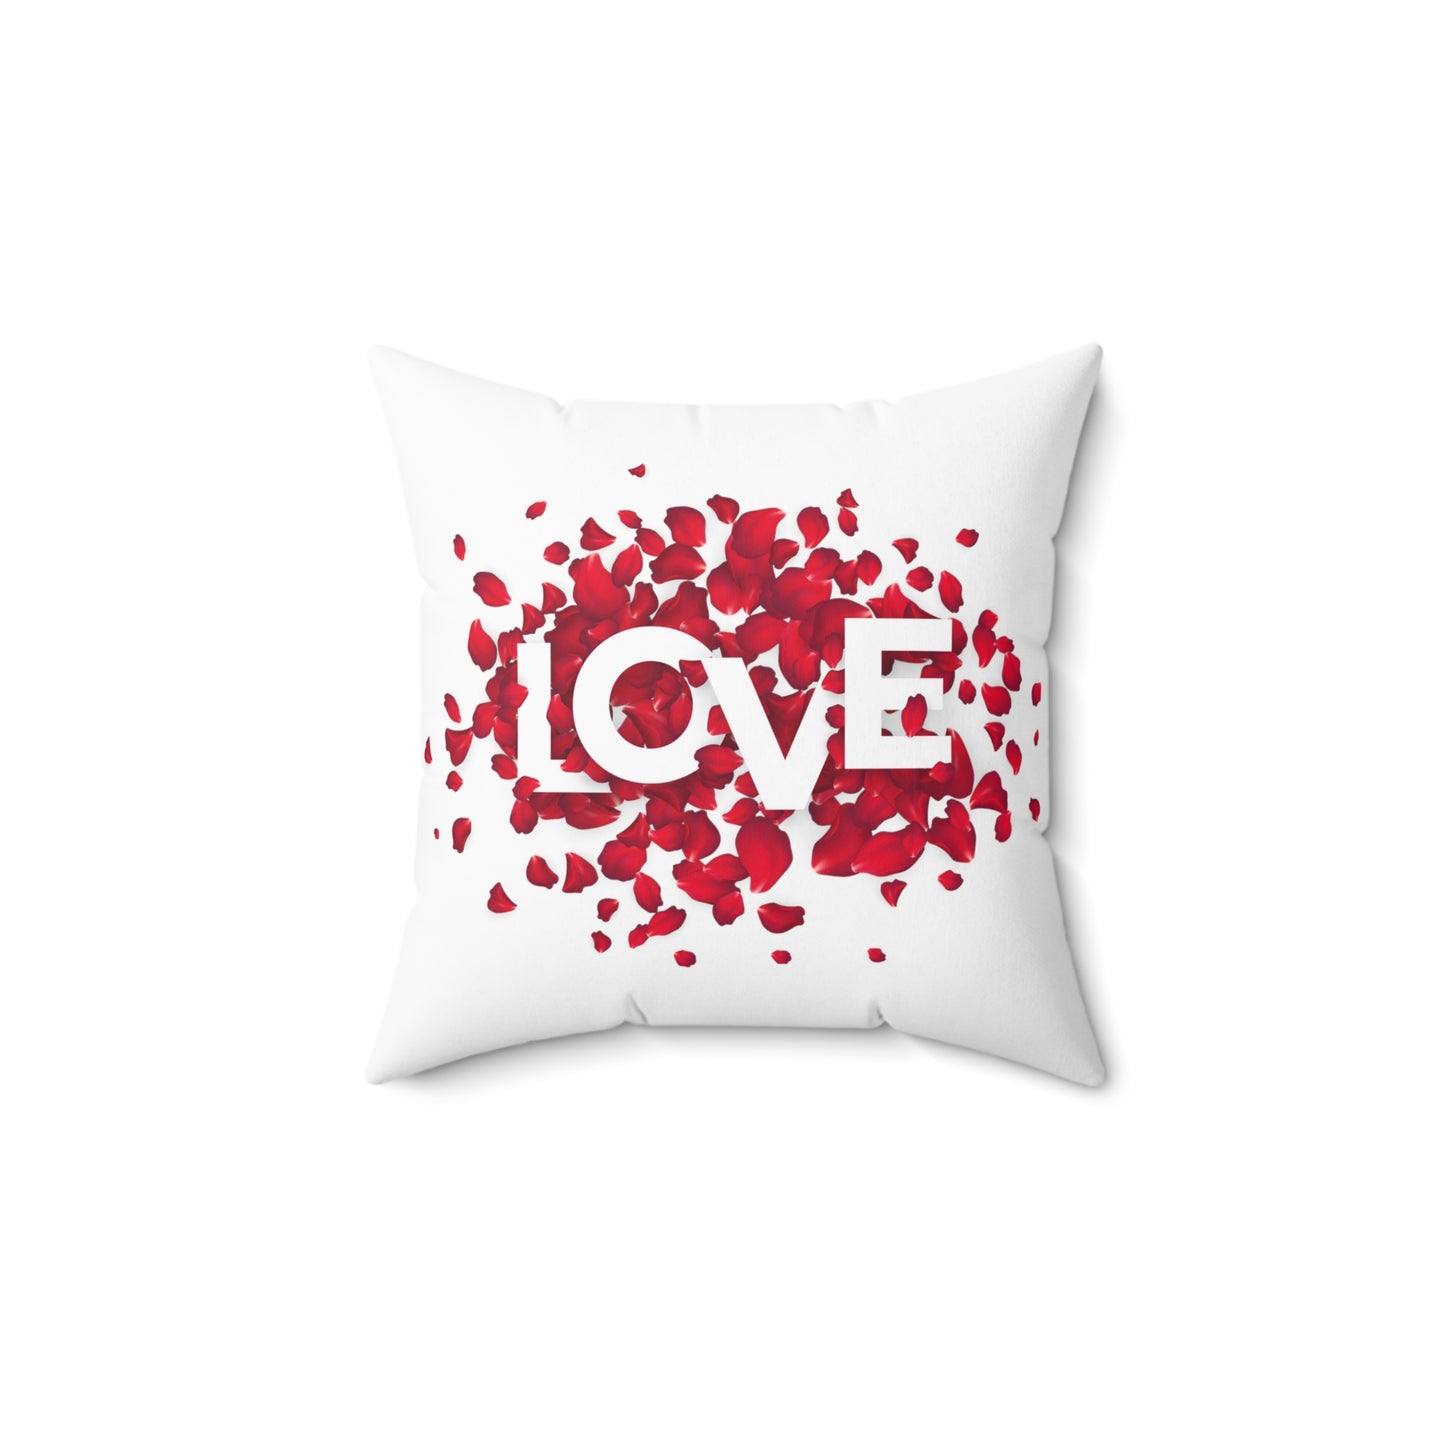 Love with Heart Made of Flowers Printed Polyester Sqaure Pillow